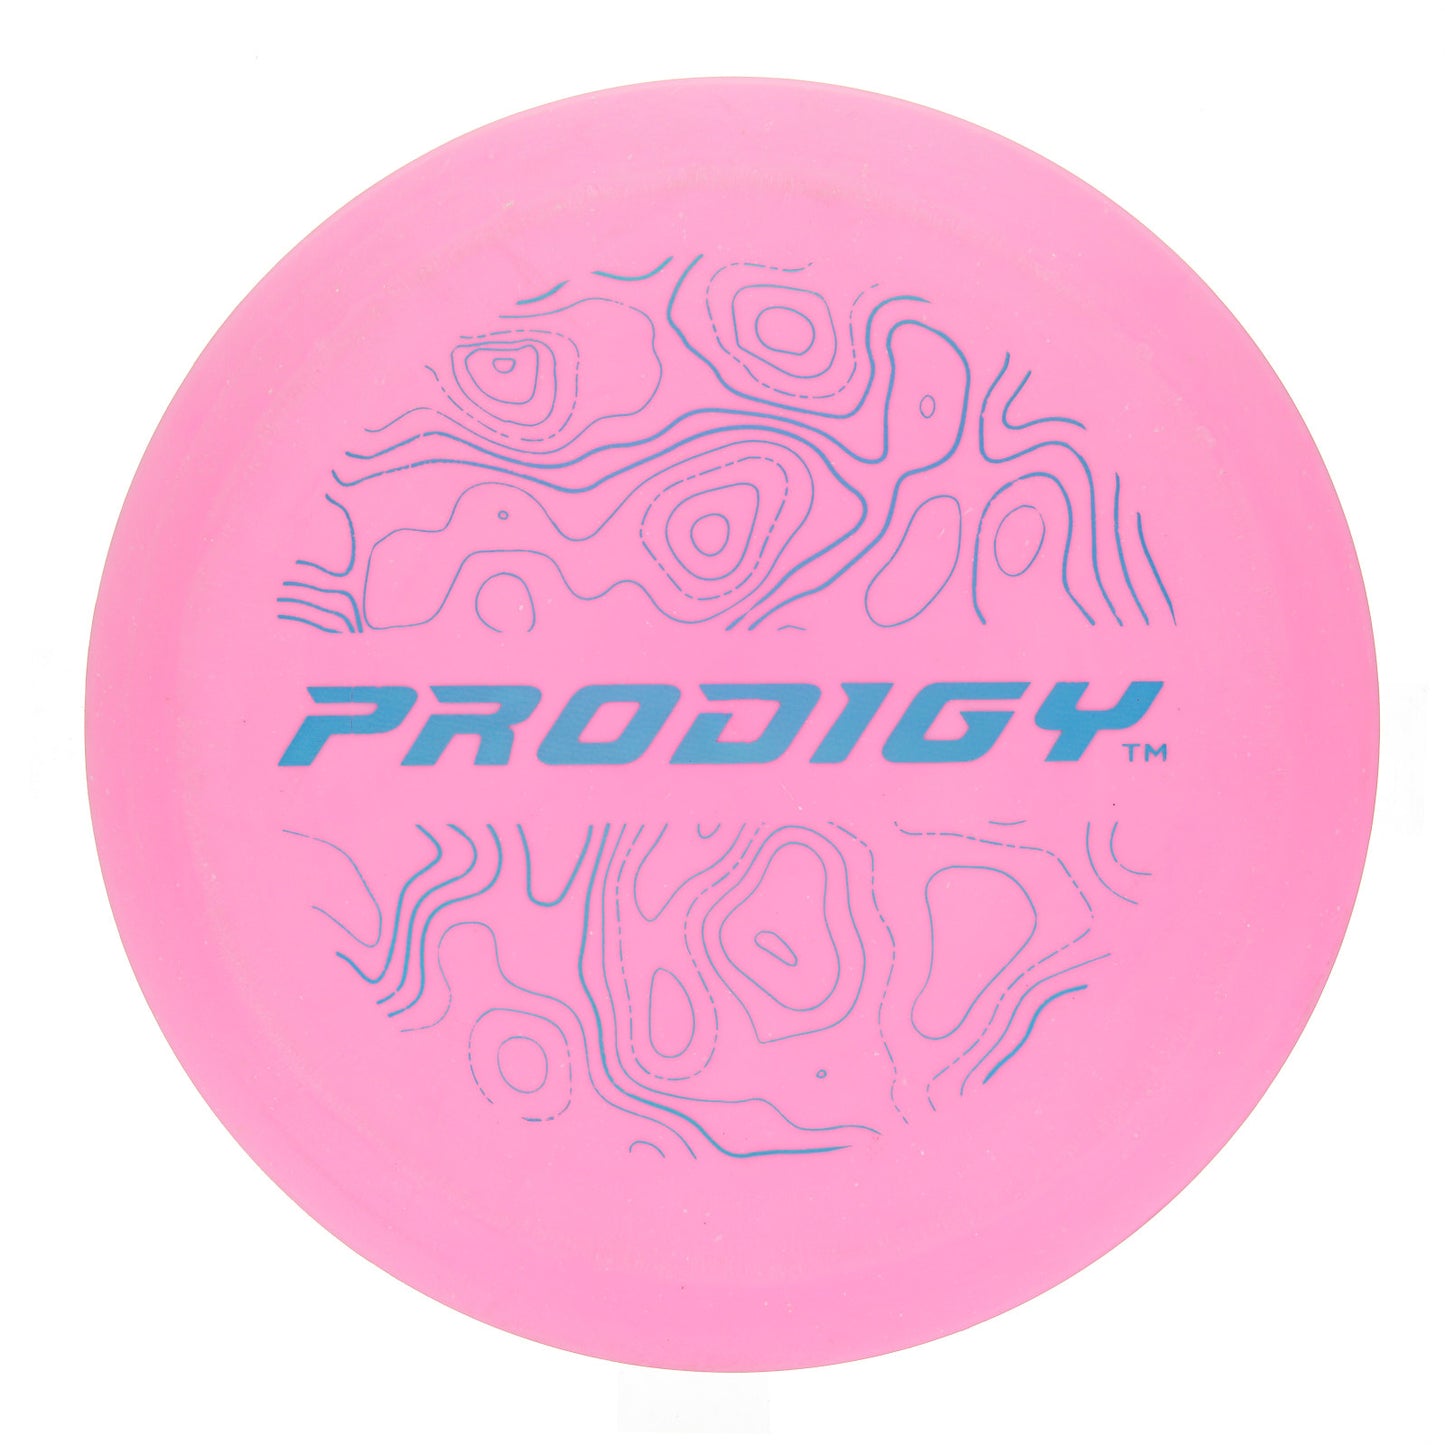 Prodigy H4 V2 - Topographic Stamp 300 171g | Style 0001